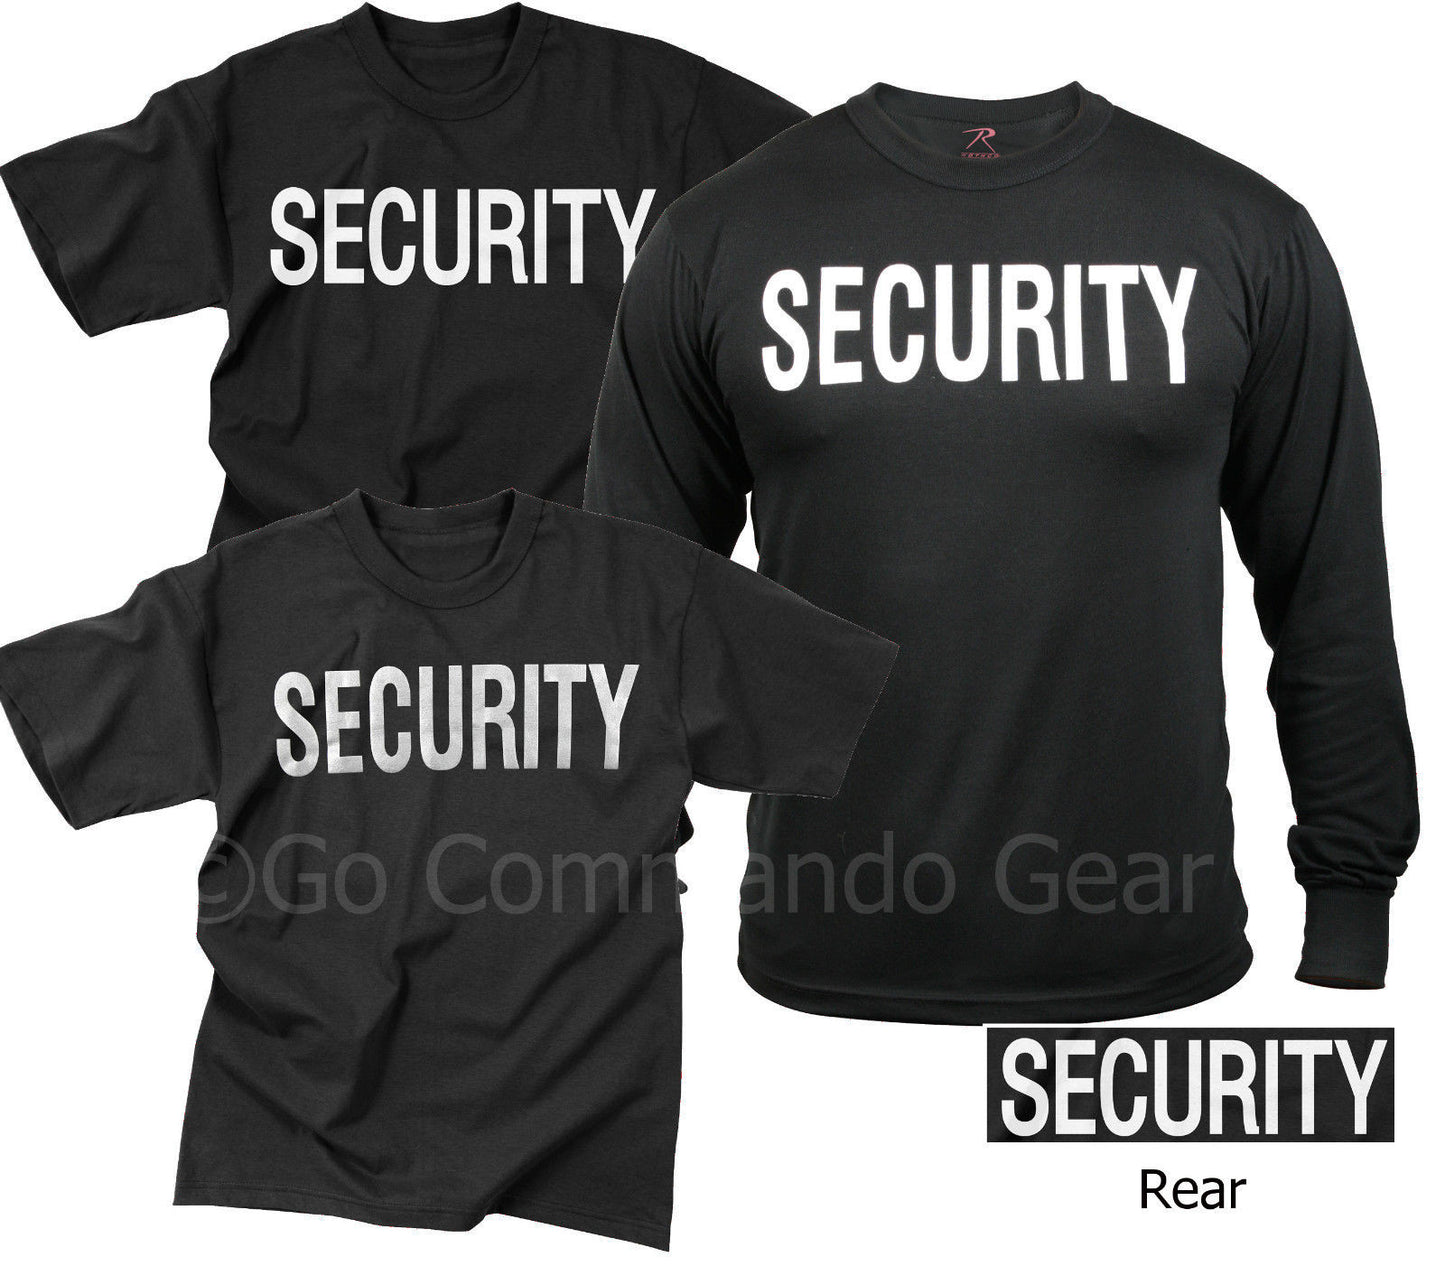 Security T-Shirt Tees Event Bouncer Staff Double Sided Black Tee Shirts